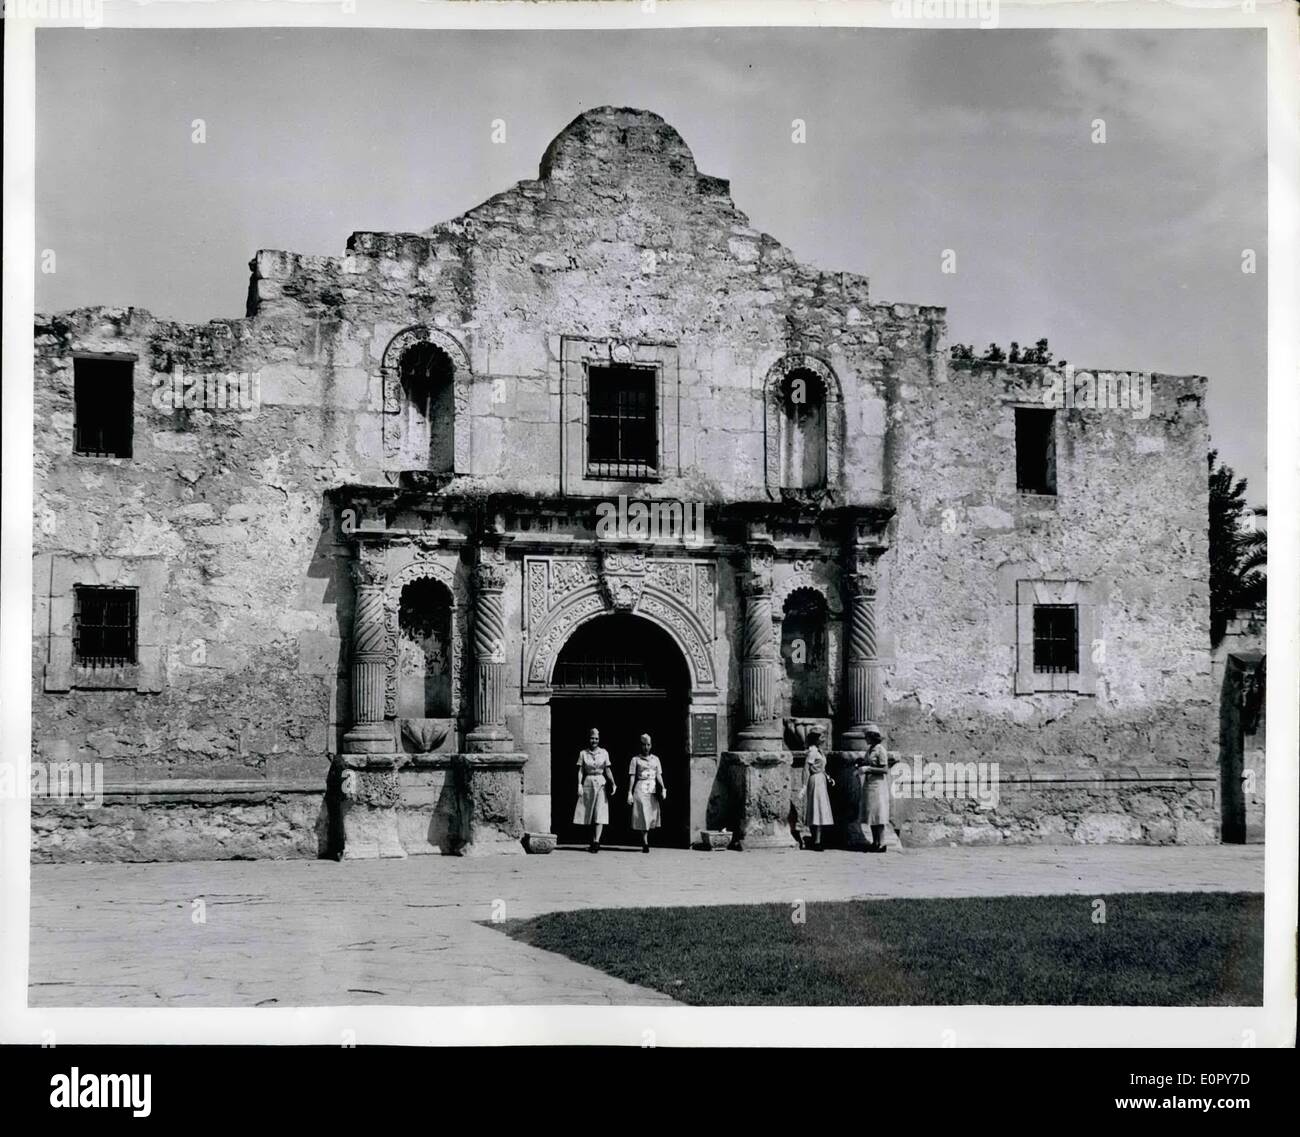 May 05, 1957 - America Honors Its War Dead: The Alamo At San Antonio, Texas Represents The Heroism Of Such Men As Colonel William B. Travis, James Bowie And Davy Crocket, In The Fight For The Independence Of Texas. This Historic Fortification Which Is Now Pre-Served As A National Landmark Was Originally Used An A Franciscan Mission. Official U.S. Army Photo Released By The Dept. Of Defense Washington, D.C. Stock Photo